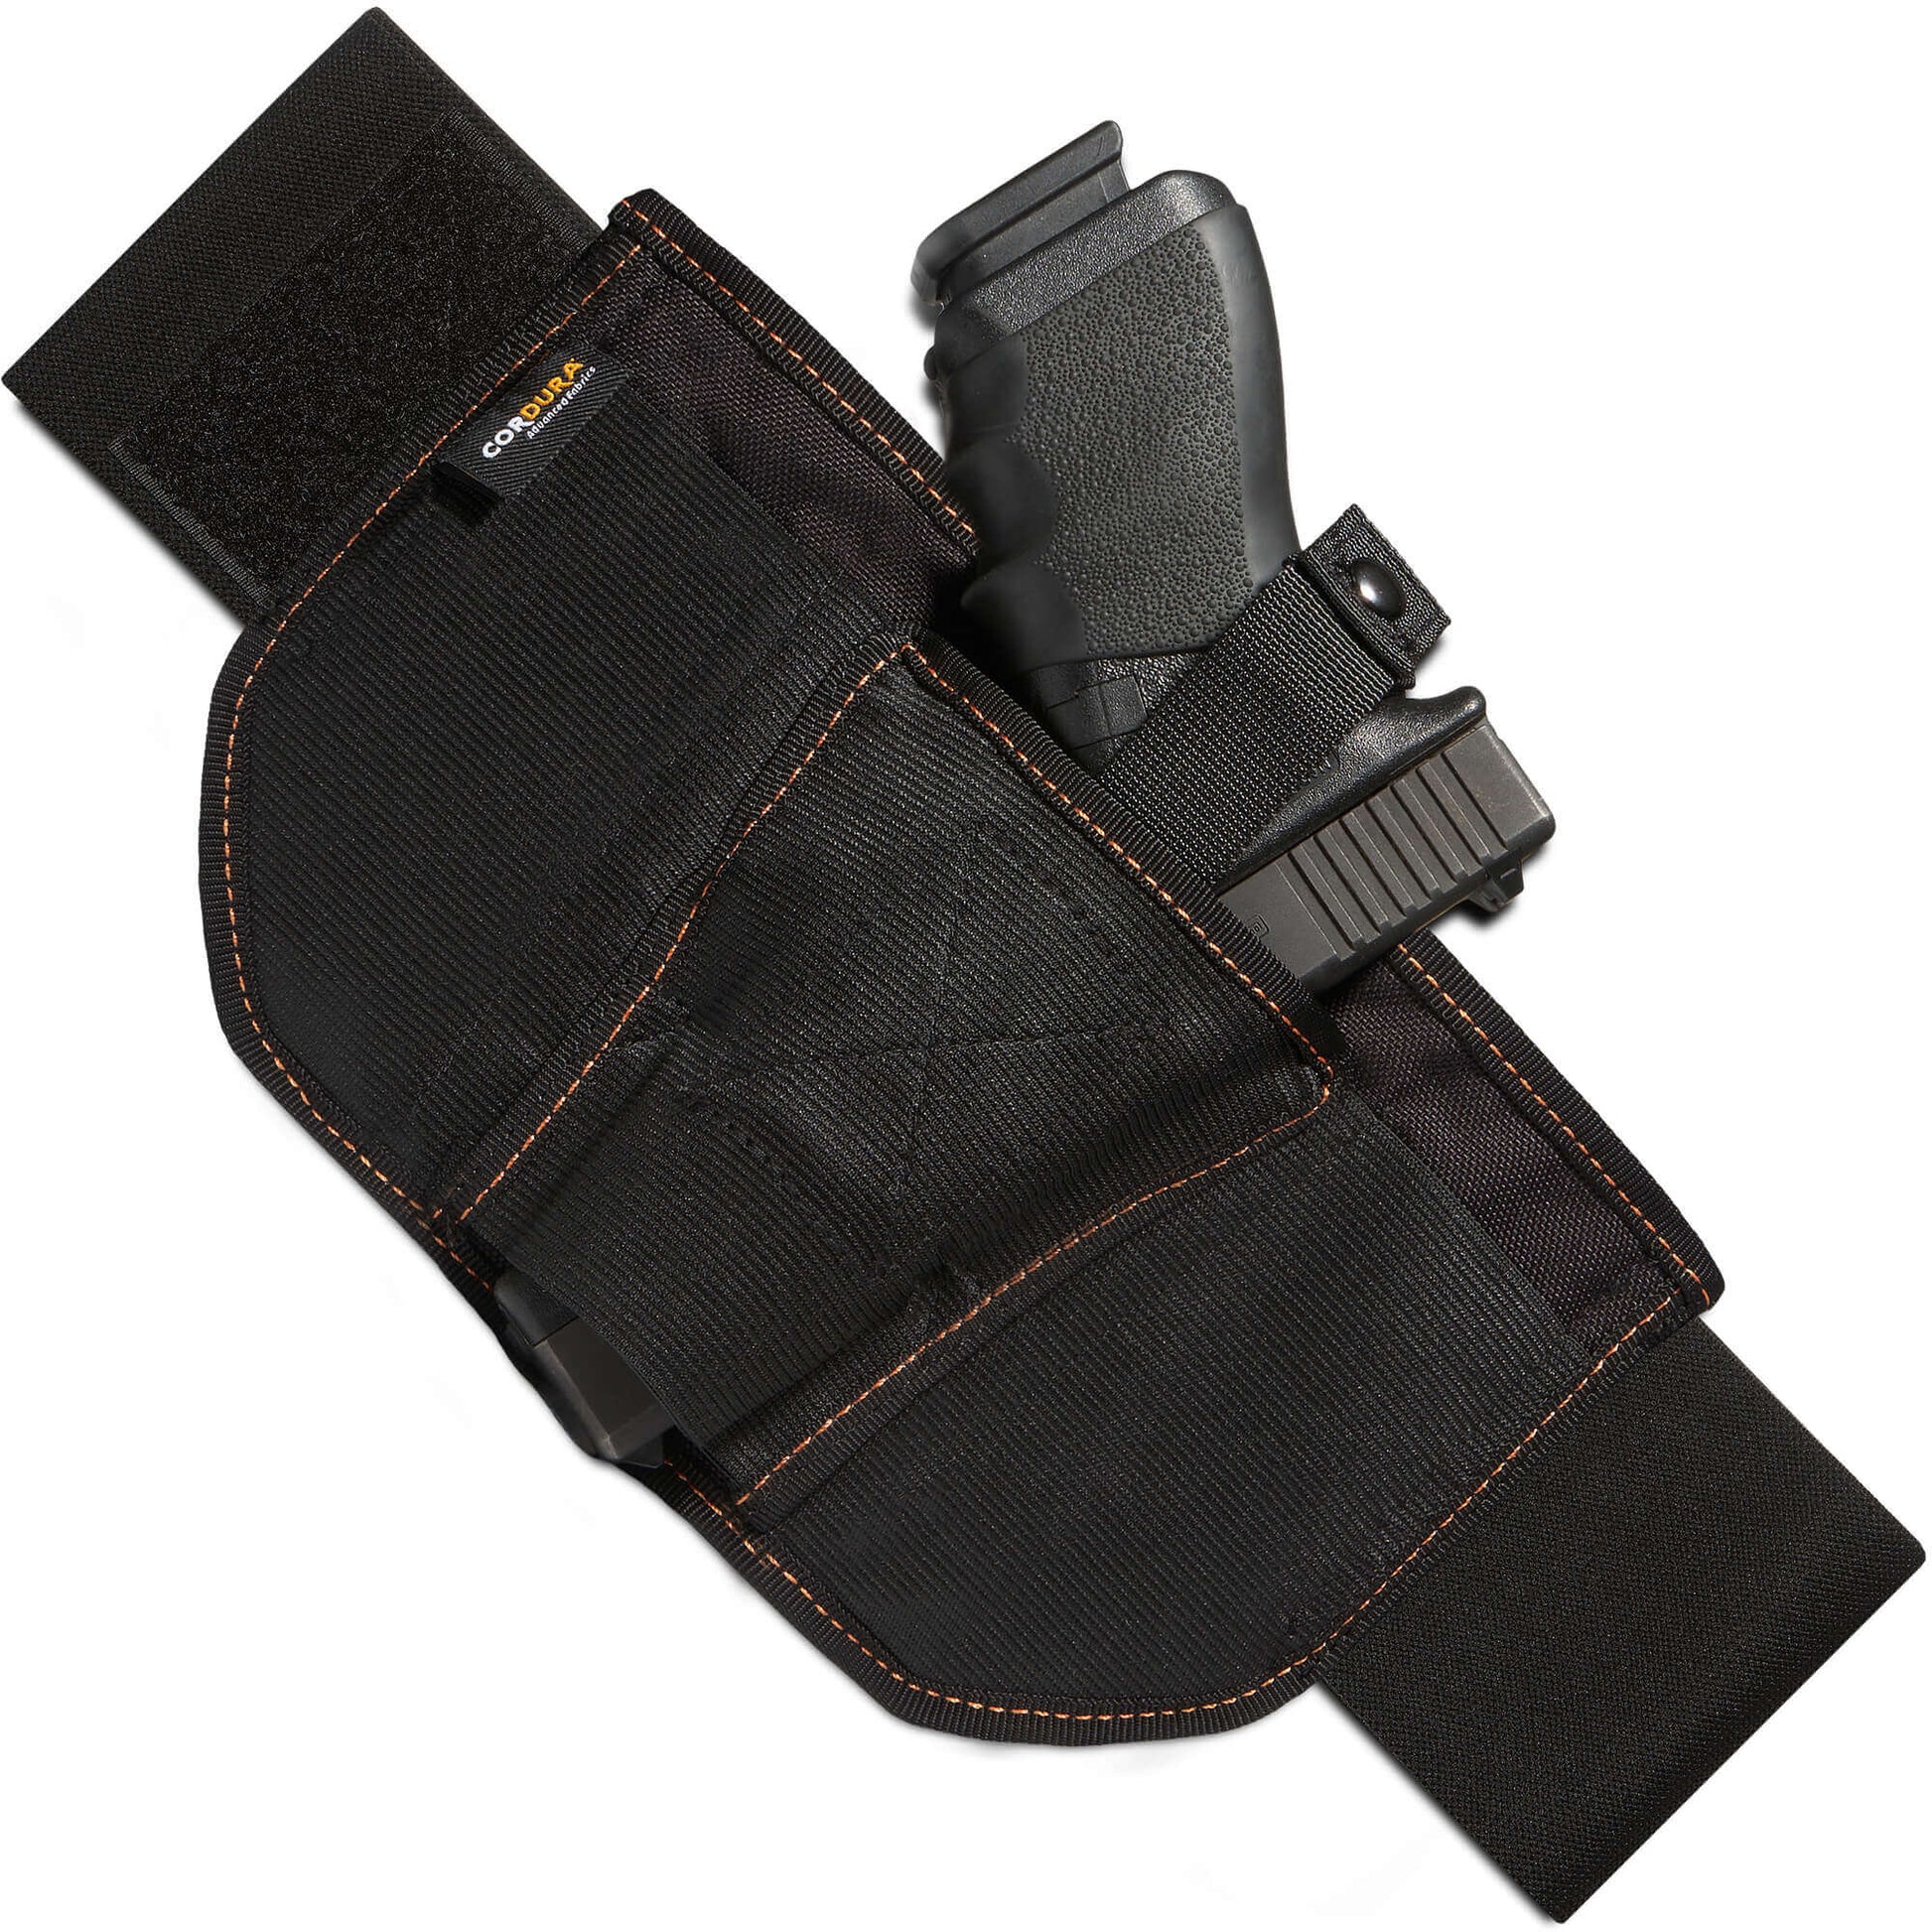 Tilted view of VNSH Black Holster with a gun in it